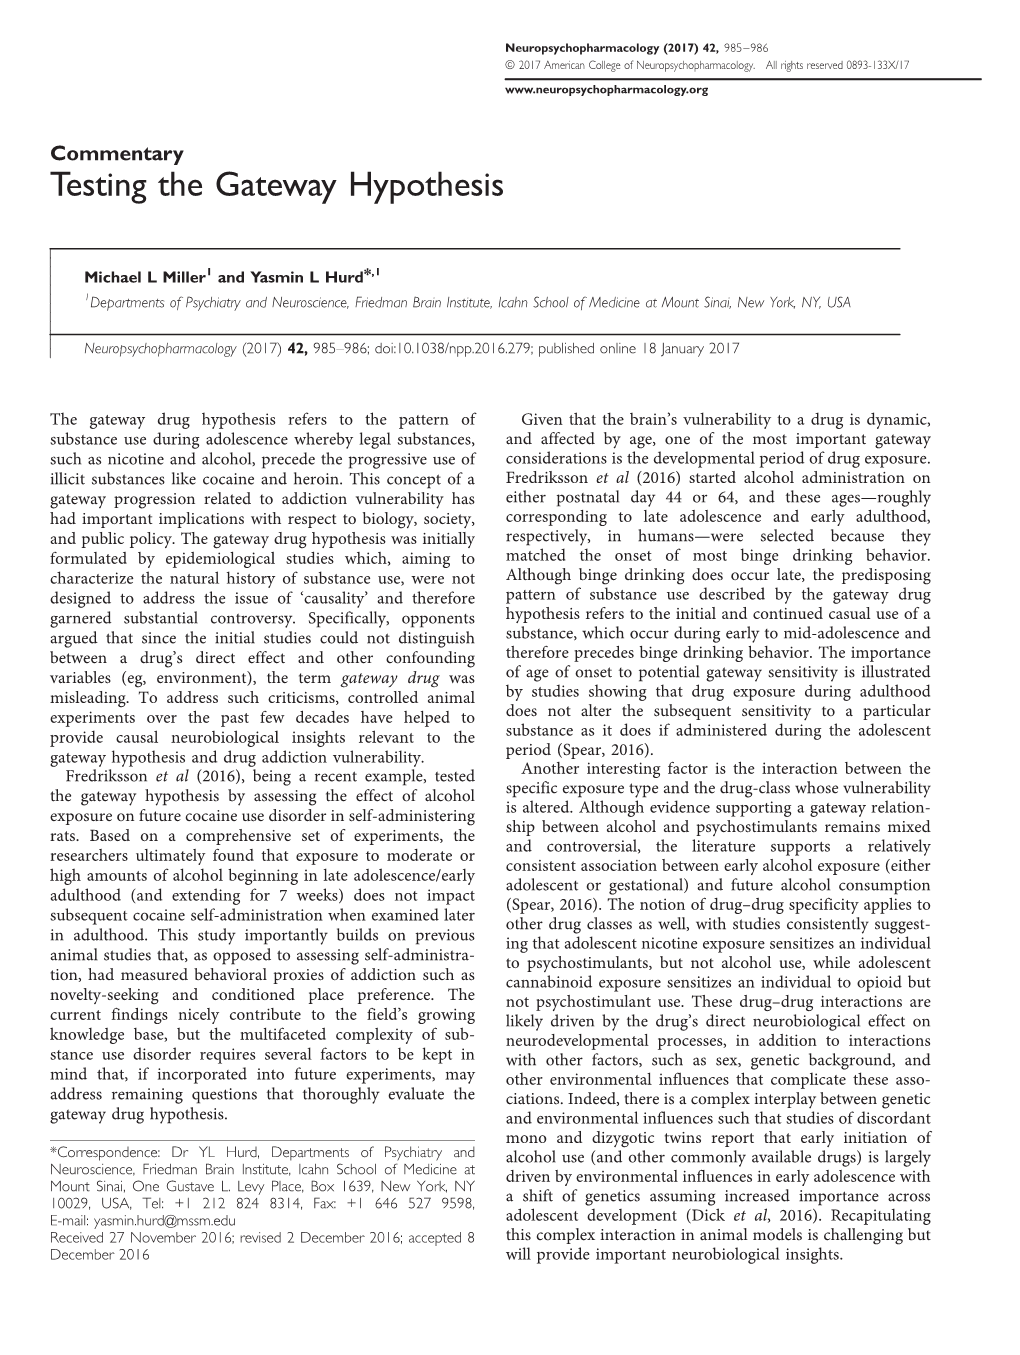 Testing the Gateway Hypothesis